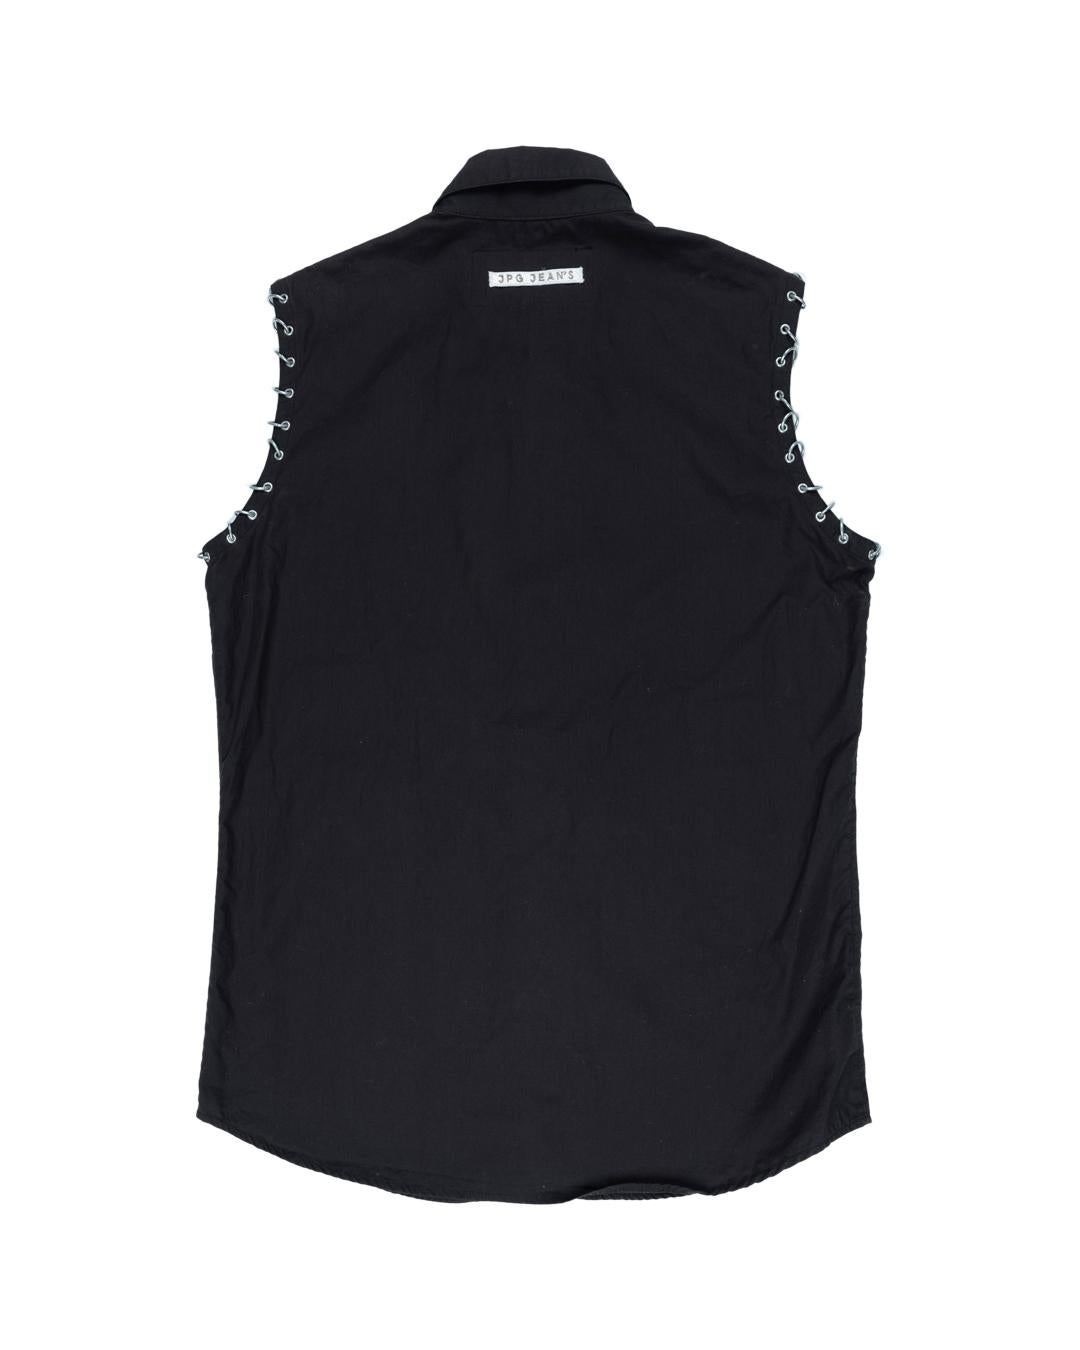 Jean Paul Gaultier Metal Pierced Sleeveless Shirt In Good Condition For Sale In Beverly Hills, CA